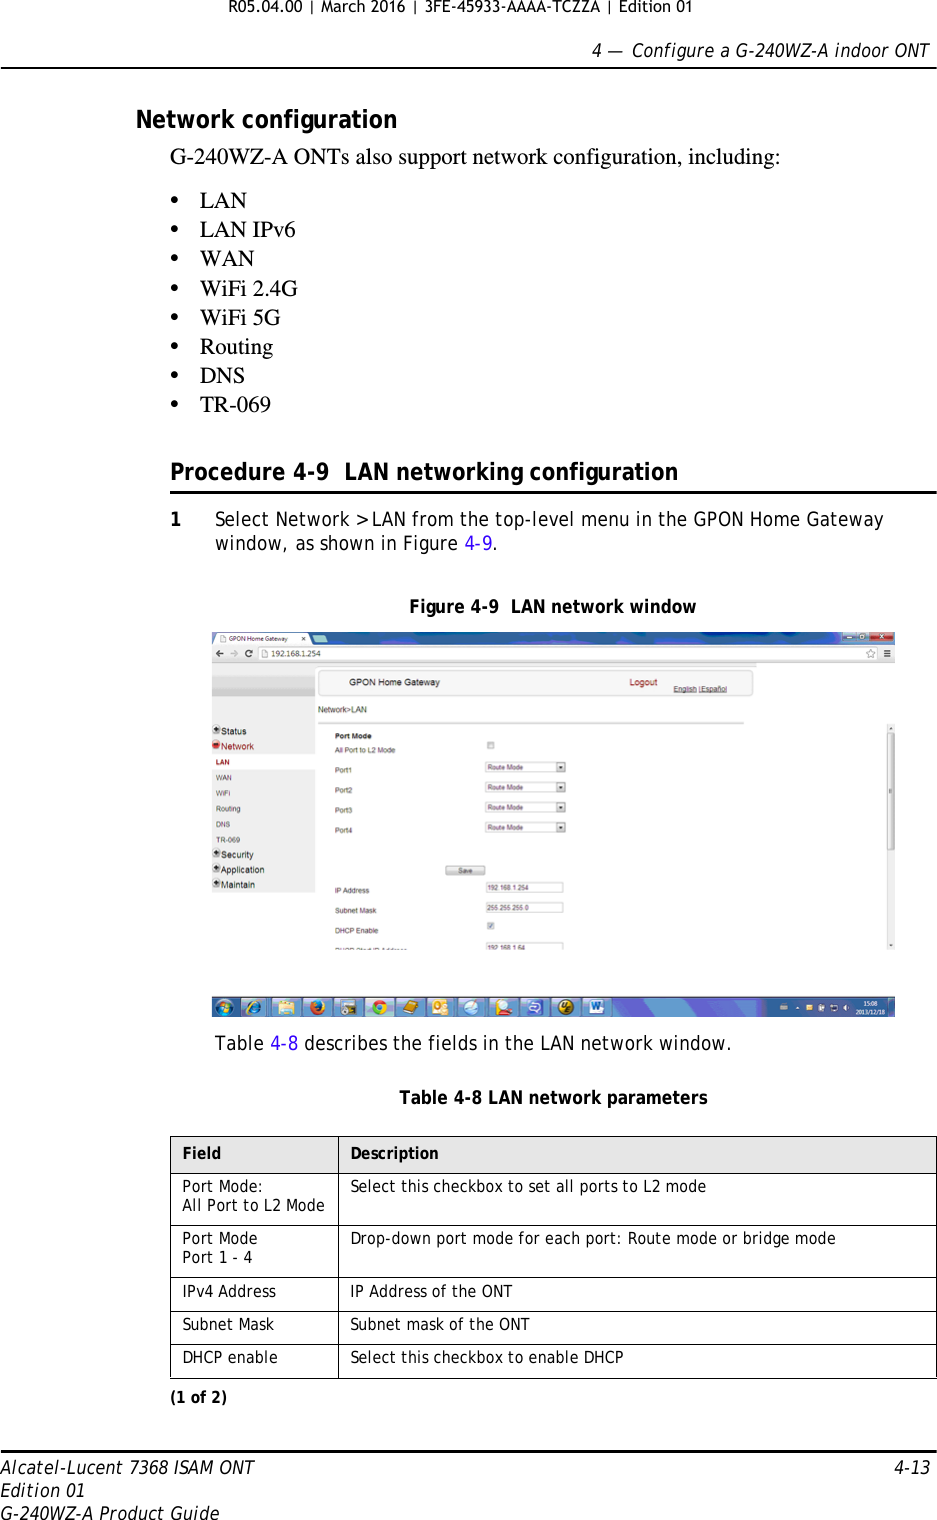 4 —  Configure a G-240WZ-A indoor ONTAlcatel-Lucent 7368 ISAM ONT 4-13Edition 01G-240WZ-A Product GuideNetwork configurationG-240WZ-A ONTs also support network configuration, including:•LAN•LAN IPv6•WAN•WiFi 2.4G •WiFi 5G •Routing•DNS•TR-069Procedure 4-9  LAN networking configuration1Select Network &gt; LAN from the top-level menu in the GPON Home Gateway window, as shown in Figure 4-9.Figure 4-9  LAN network windowTable 4-8 describes the fields in the LAN network window.Table 4-8 LAN network parametersField DescriptionPort Mode: All Port to L2 Mode Select this checkbox to set all ports to L2 modePort ModePort 1 - 4 Drop-down port mode for each port: Route mode or bridge modeIPv4 Address IP Address of the ONTSubnet Mask Subnet mask of the ONTDHCP enable Select this checkbox to enable DHCP(1 of 2)R05.04.00 | March 2016 | 3FE-45933-AAAA-TCZZA | Edition 01 